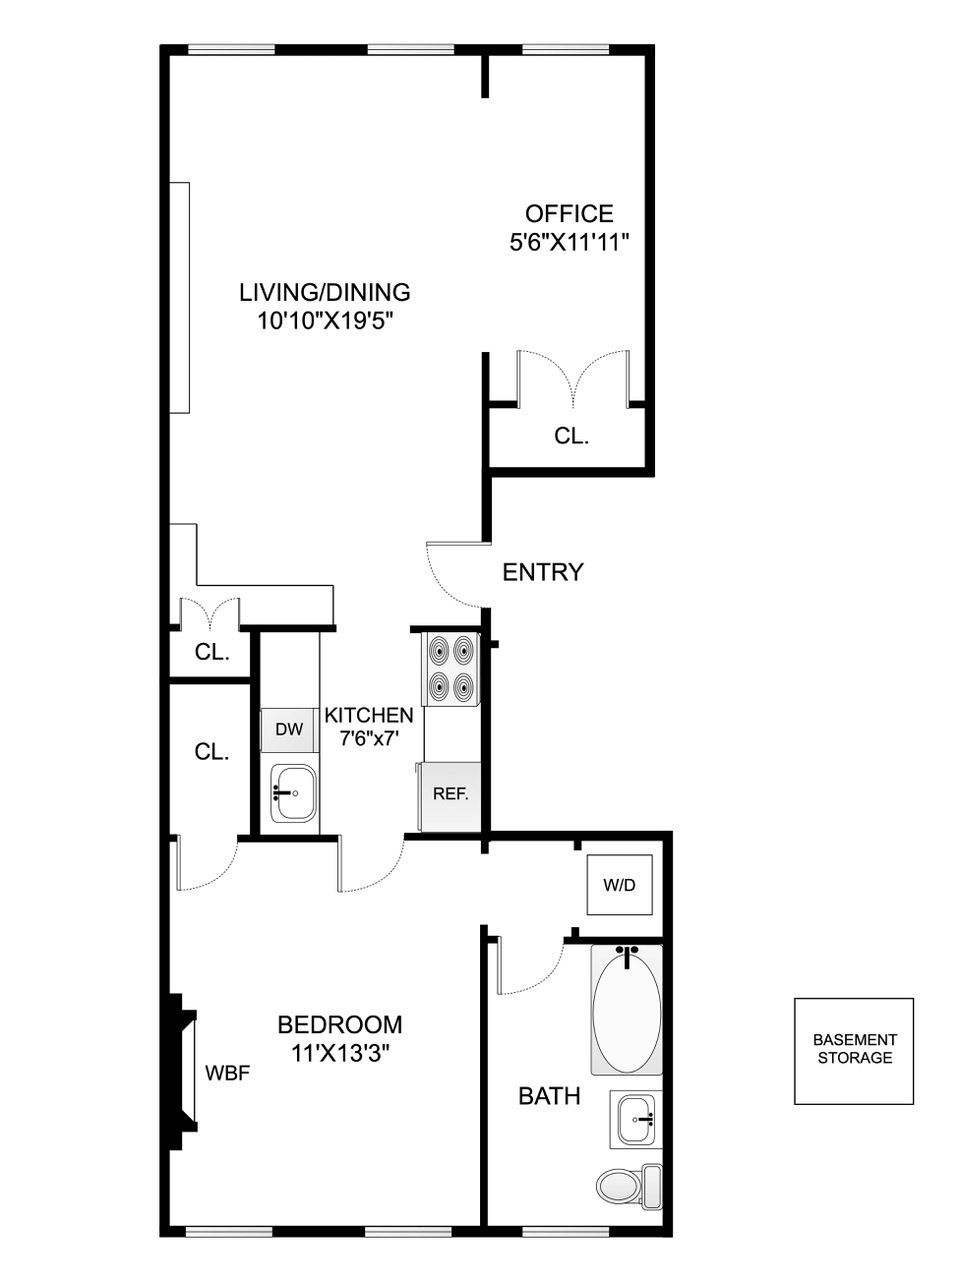 floorplan showing living room on one end and bedroom on the other